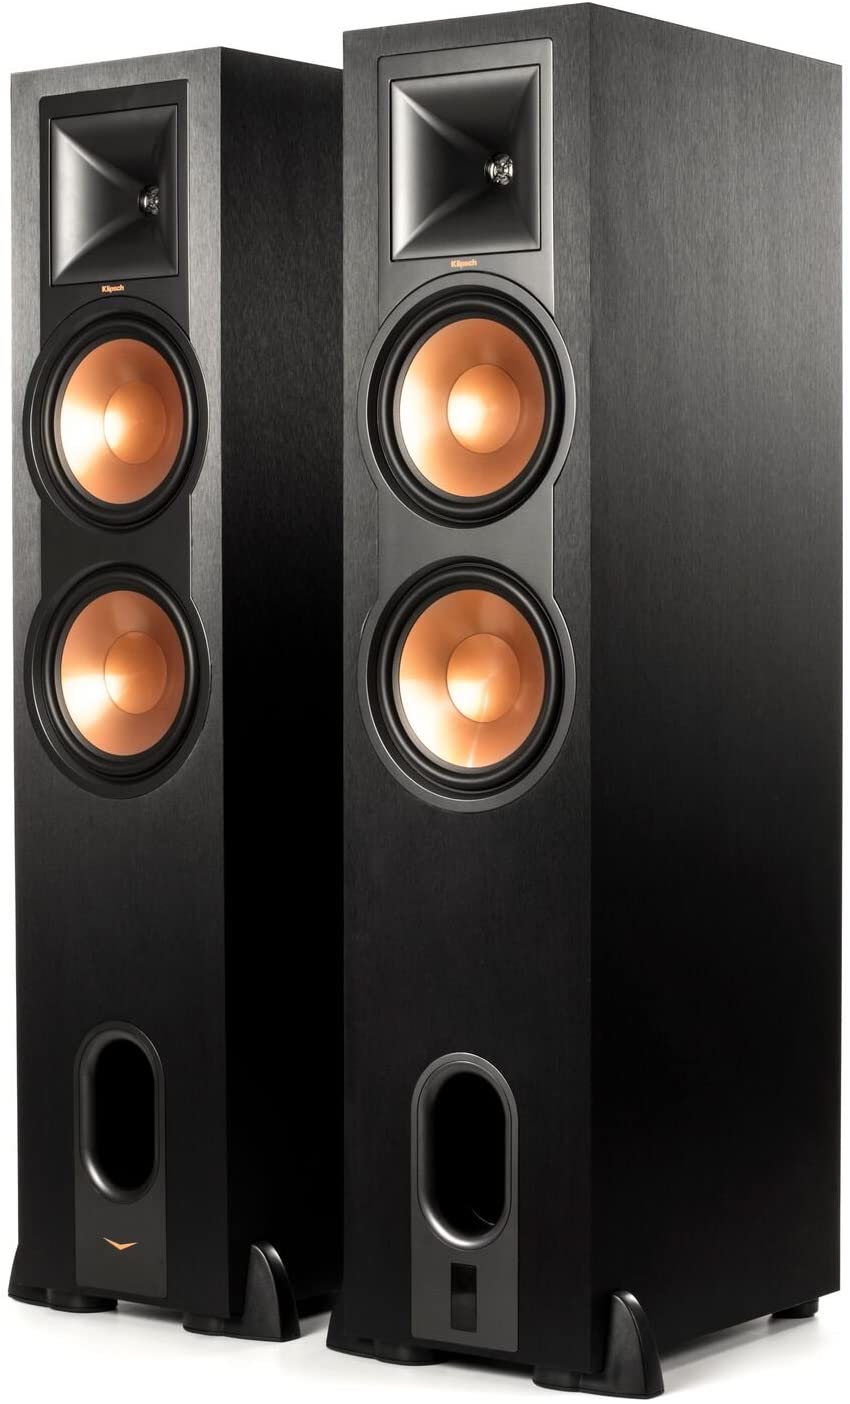 Klipsch Home Speaker With Built-In Amplifier And Remote, 1-Pair